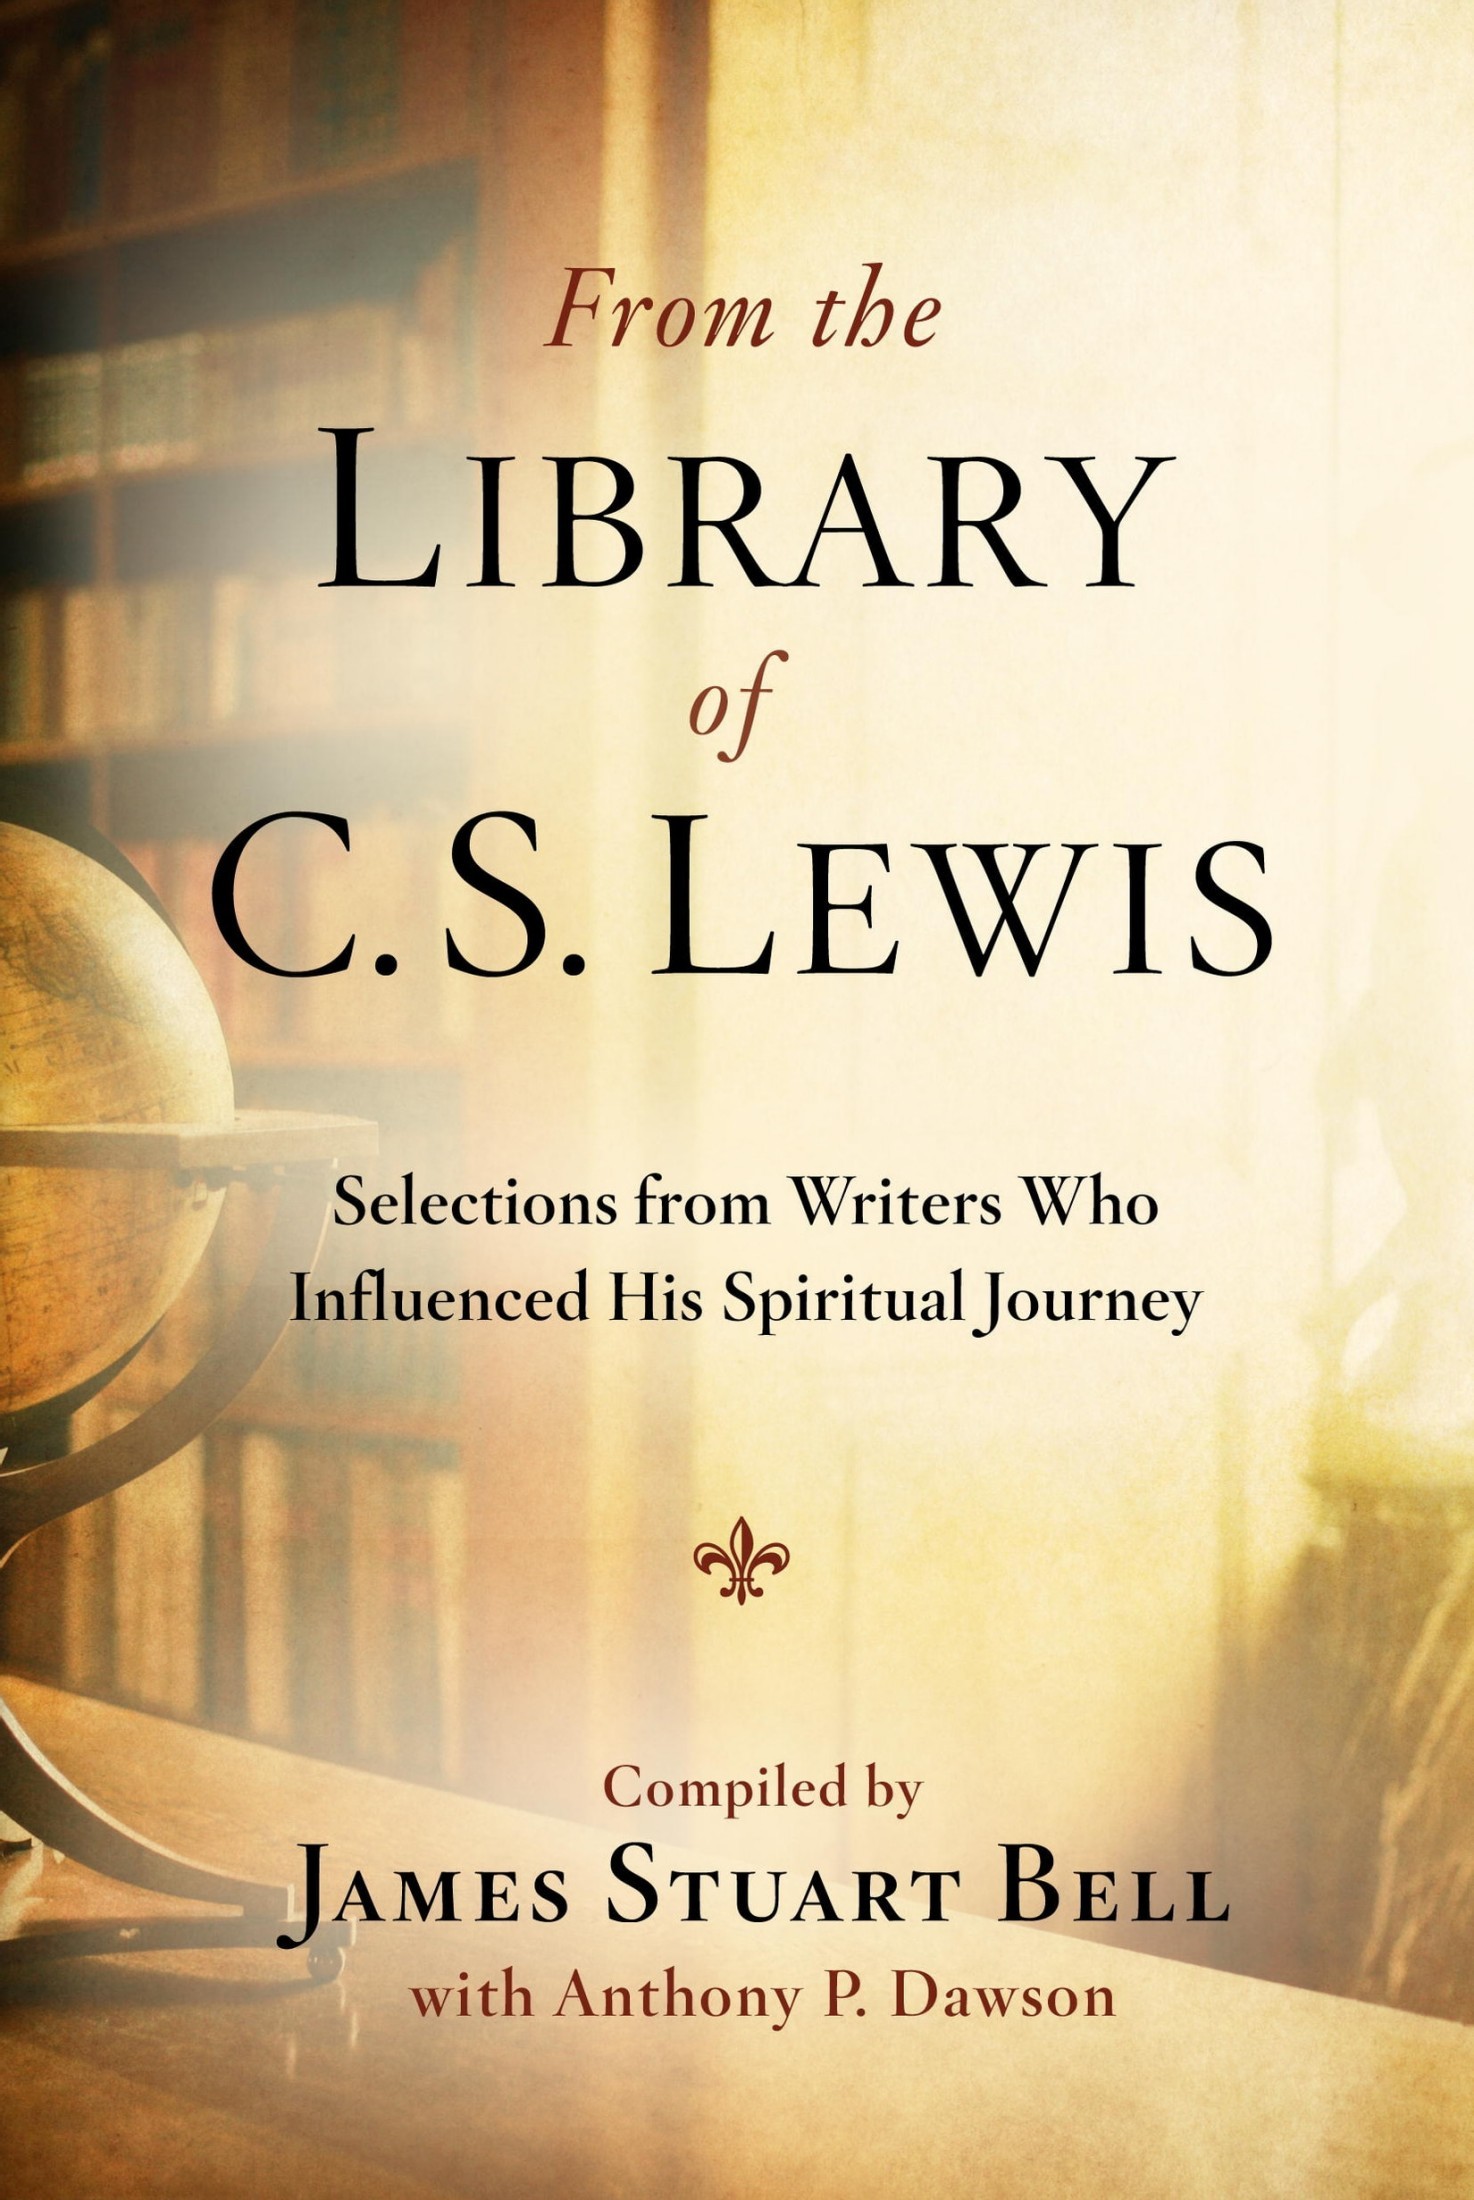 From the Library of C. S. Lewis